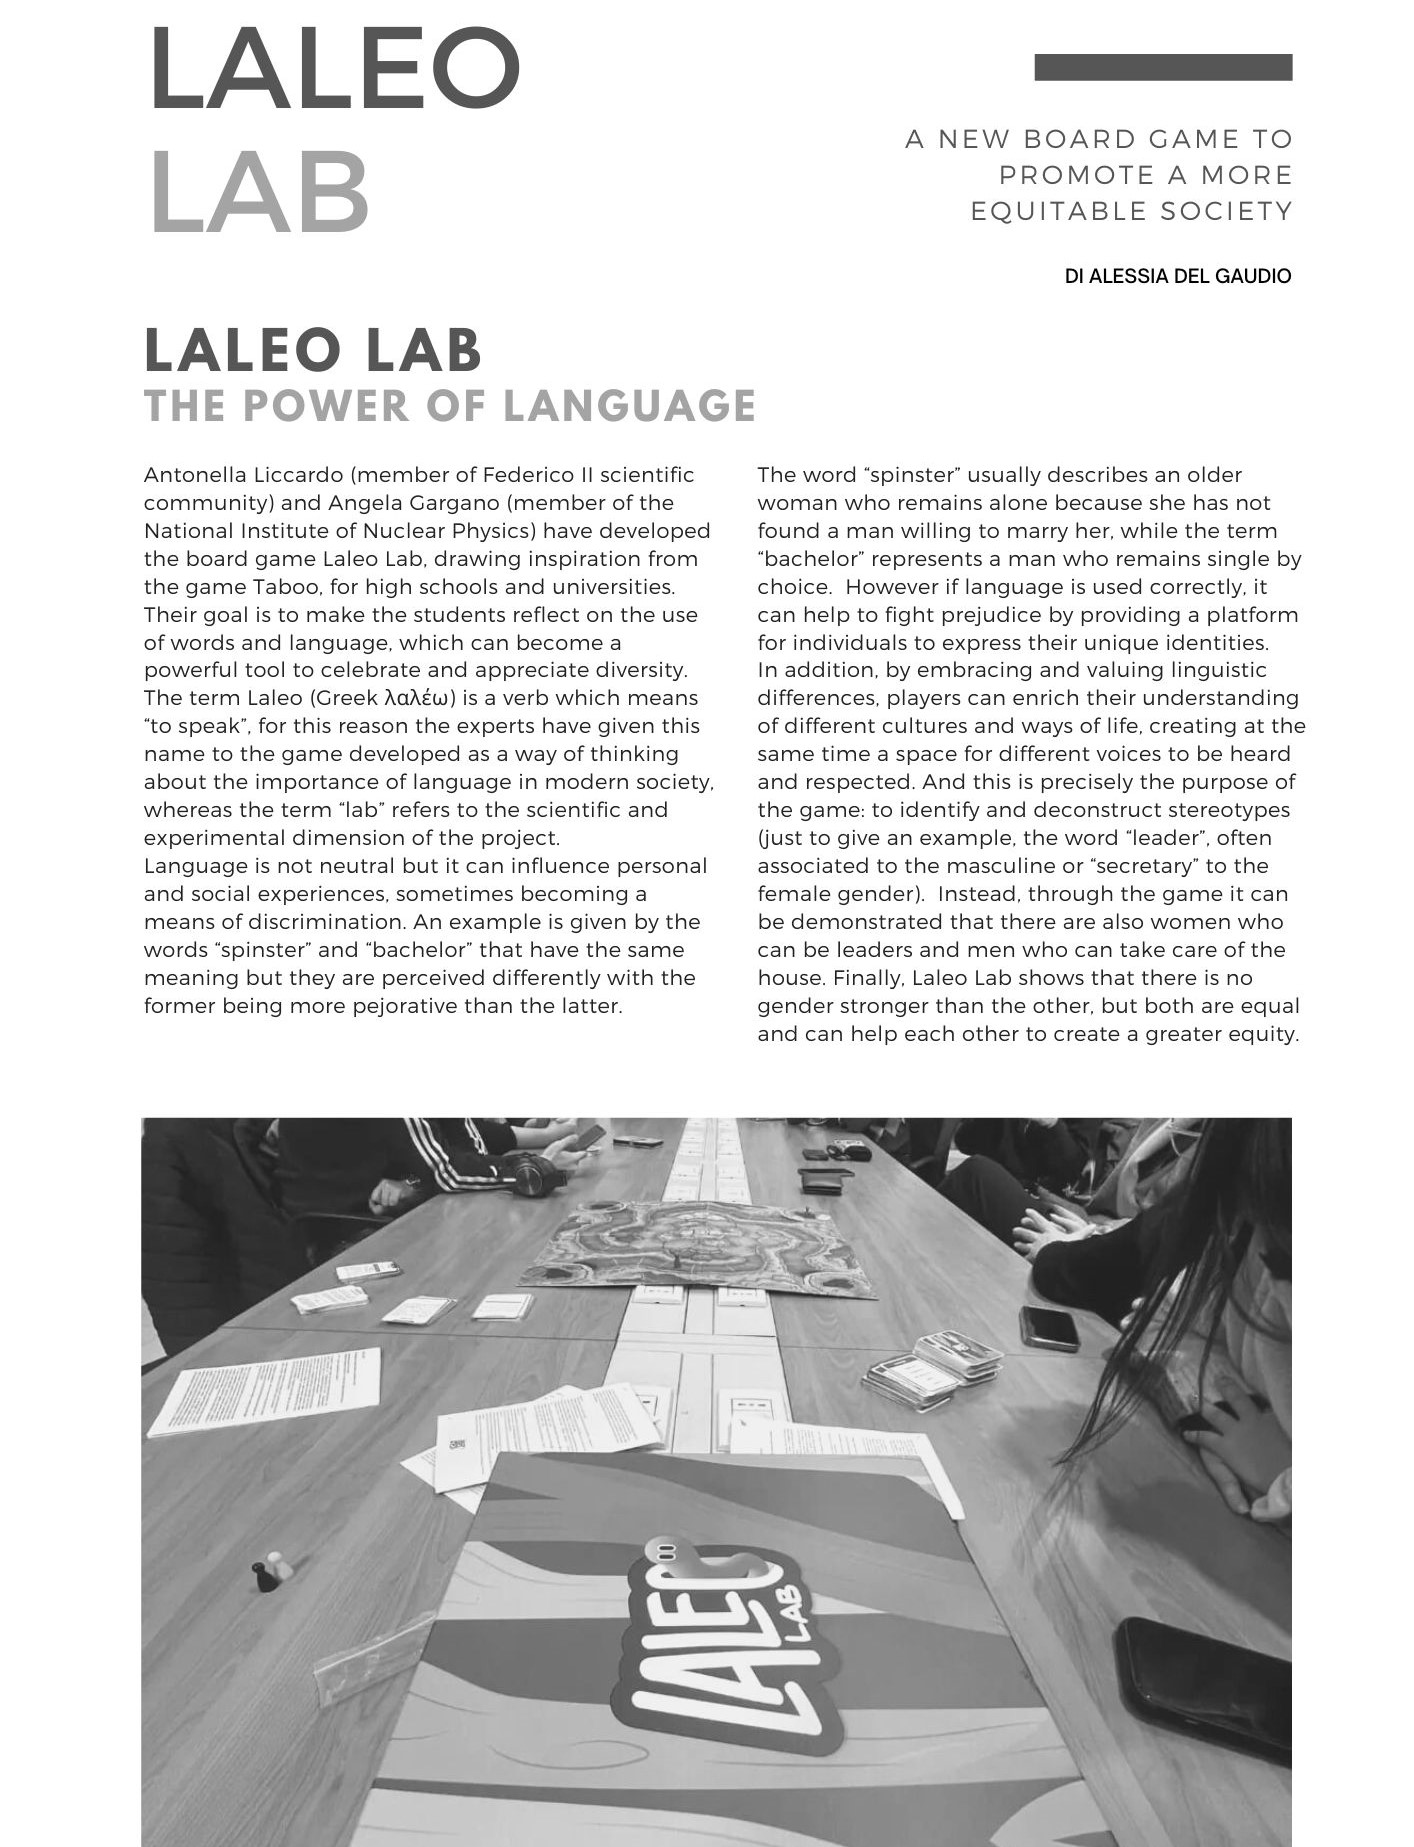 LALEO LAB, a new board game to promote a more equitable society. Di Alessia del Gaudio Antonella Liccardo (member of Federico II scientific community) and Angela Gargano (member of the National Institute of Nuclear Physics) have developed the board game Laleo Lab, drawing inspiration from the game Taboo, for high schools and universities. Their goal is to make the students reflect on the use of words and language, which can become a powerful tool to celebrate and appreciate diversity. The term Laleo (Greek λαλέω) is a verb which means to speak, for this reason the experts have given this name to the game developed as a way of thinking about the importance of language in modern society, whereas the term lab refers to the scientific and experimental dimension of the project.  Language is not neutral but it can influence personal and social experiences, sometimes becoming a means of discrimination. An example is given by the words spinster and bachelor that have the same meaning but they are perceived differently with the former being more pejorative than the latter.  The word spinster usually describes an older woman who remains alone because she has not found a man willing to marry her, while the term bachelor represents a man who remains single by choice. However if language is used correctly, it can help to fight prejudice by providing a platform for individuals to express their unique identities. In addition, by embracing and valuing linguistic differences, players can enrich their understanding of different cultures and ways of life, creating at the same time a space for different voices to be heard and respected. And this is precisely the purpose of the game: to identify and deconstruct stereotypes (just to give an example, the word leader, often associated to the masculine or secretary to the female gender). Instead, through the game it can be demonstrated that there are also women who can be leaders and men who can take care of the house. Finally, Laleo Lab shows that there is no gender stronger than the other, but both are equal and can help each other to create a greater equity.